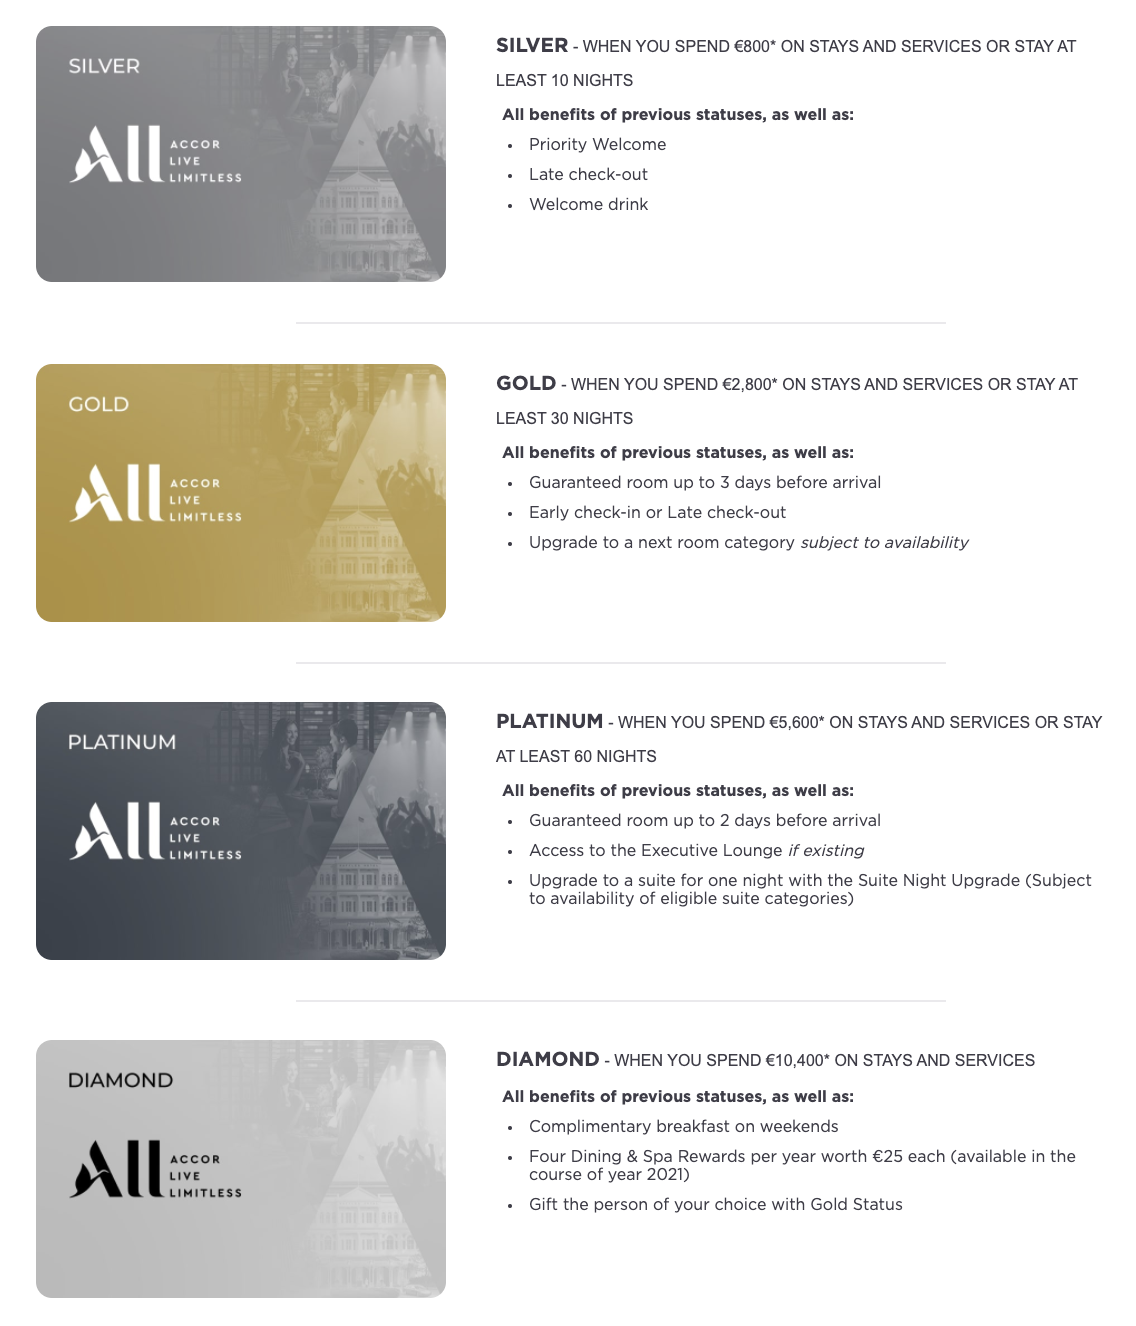 Where can I use the ALL Accor Live Limitless membership benefits